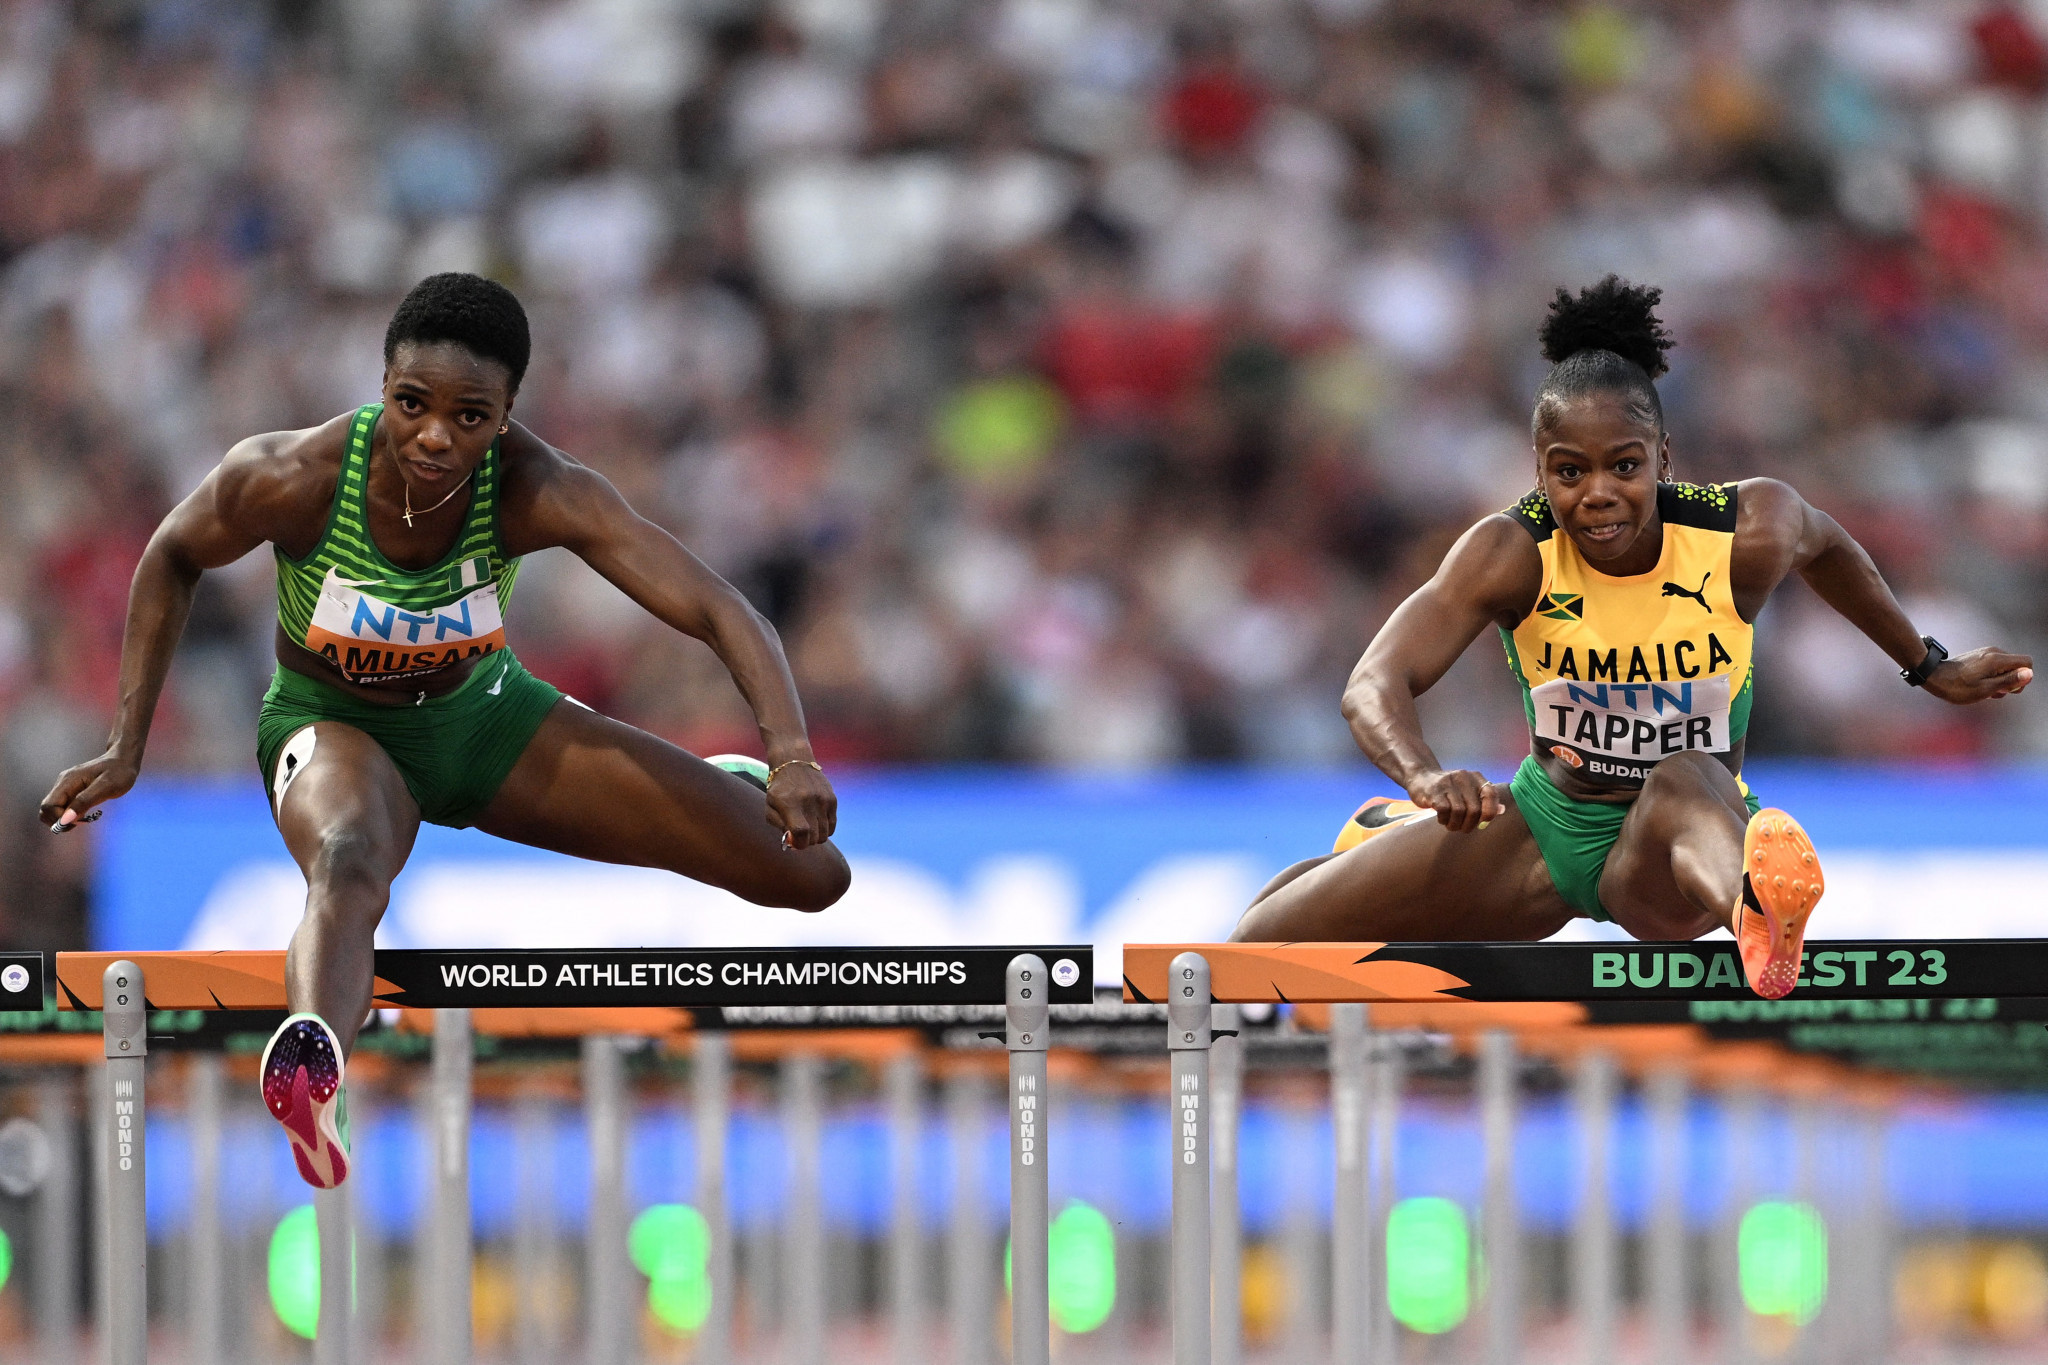 Nigeria's defending champion Tobi Amusan, left, was only cleared of an alleged anti-doping rule violation on Thursday (August 17), but won her 100m hurdles heat in Budapest ©Getty Images